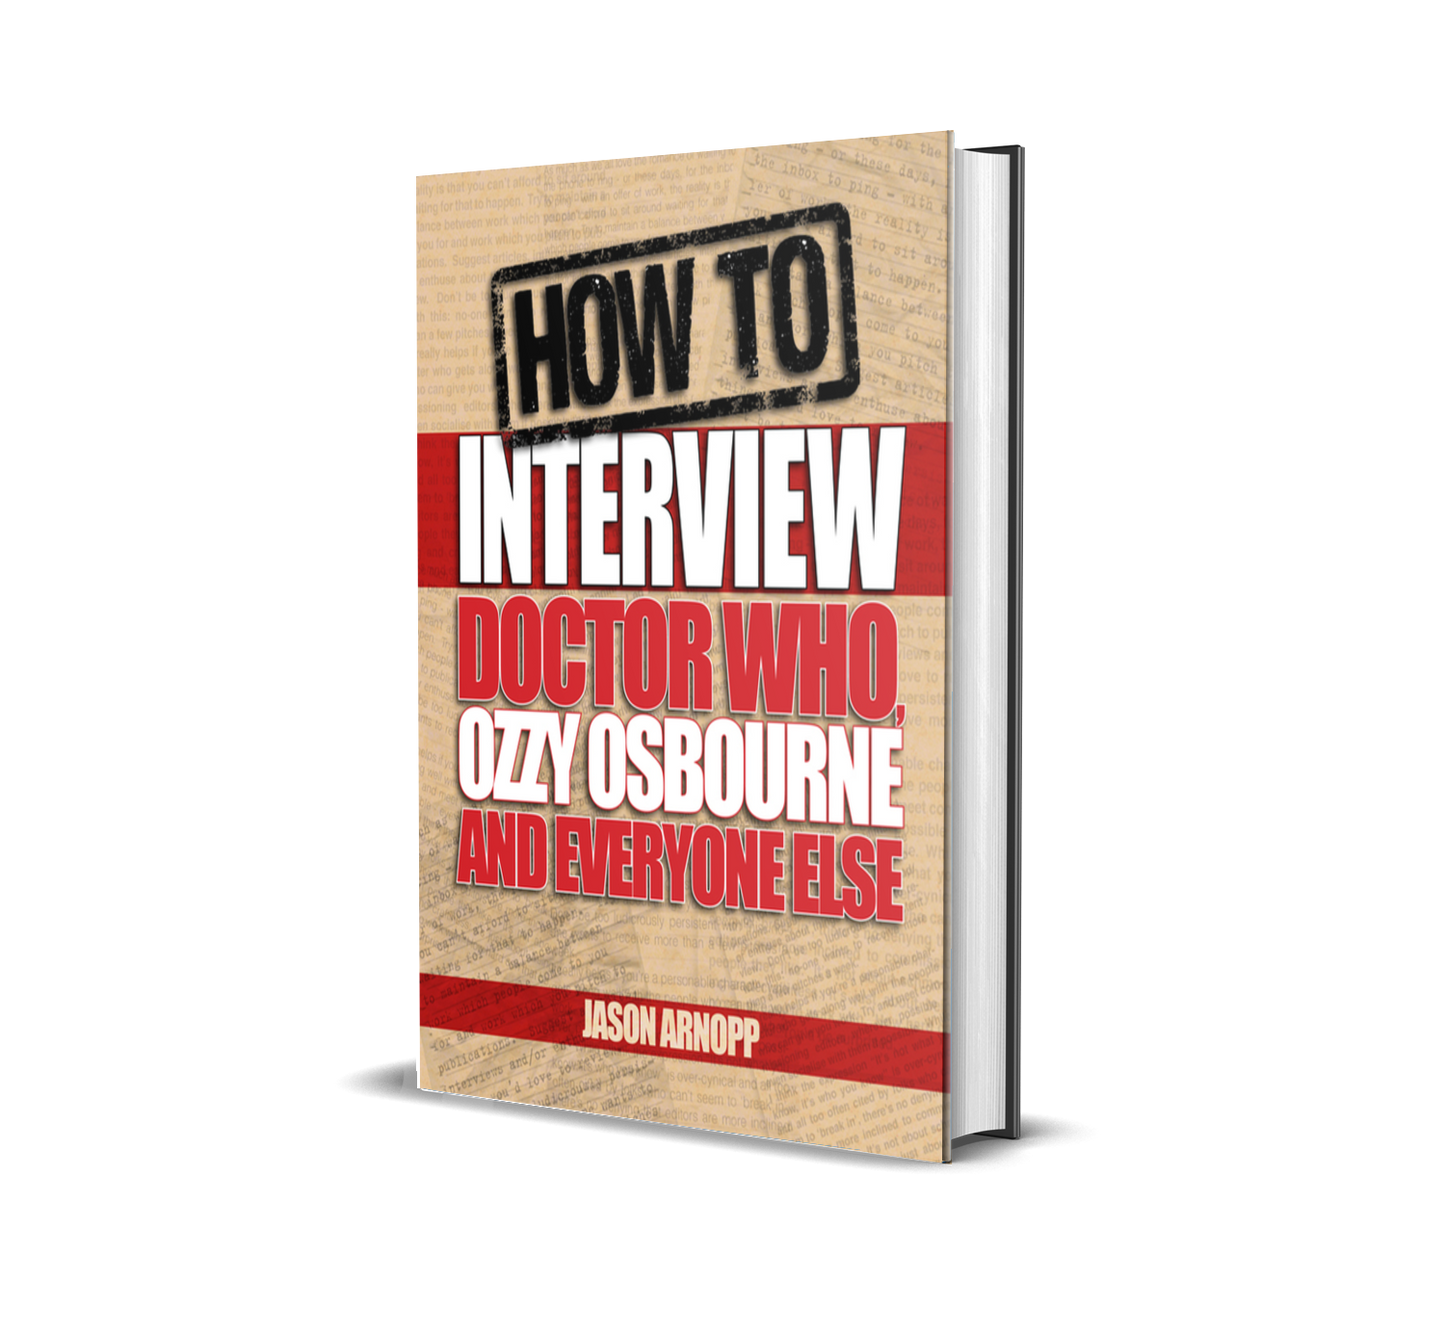 How To Interview Doctor Who, Ozzy Osbourne And Everyone Else by Jason Arnopp: become a better journalist